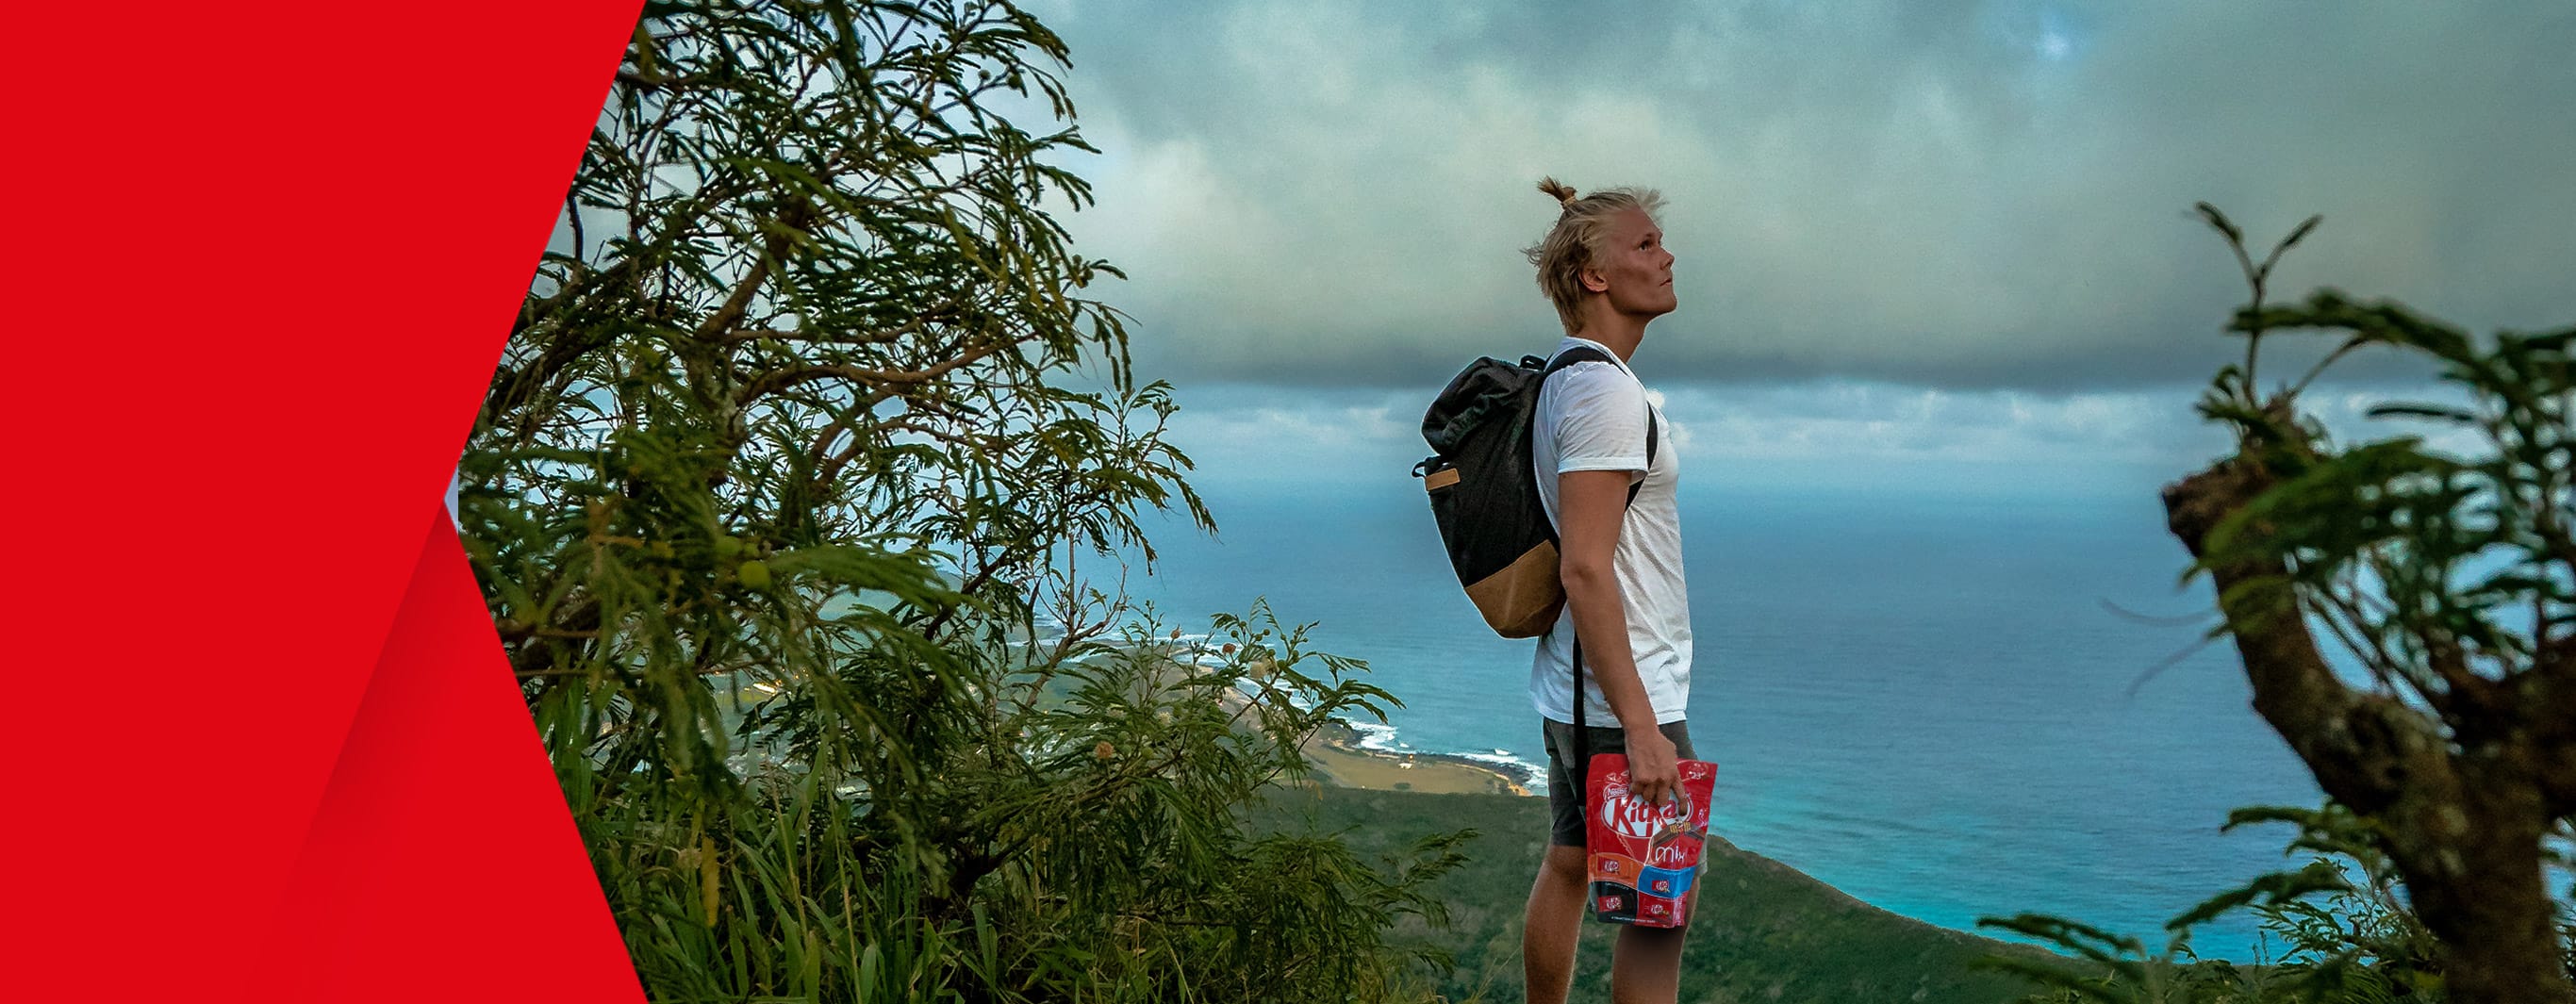 A man holding a bag of KitKat chocolates and surrounded by bushes stands at the edge of high vantage point, overlooking a wide vista of the sea and tropical shoreline in the below